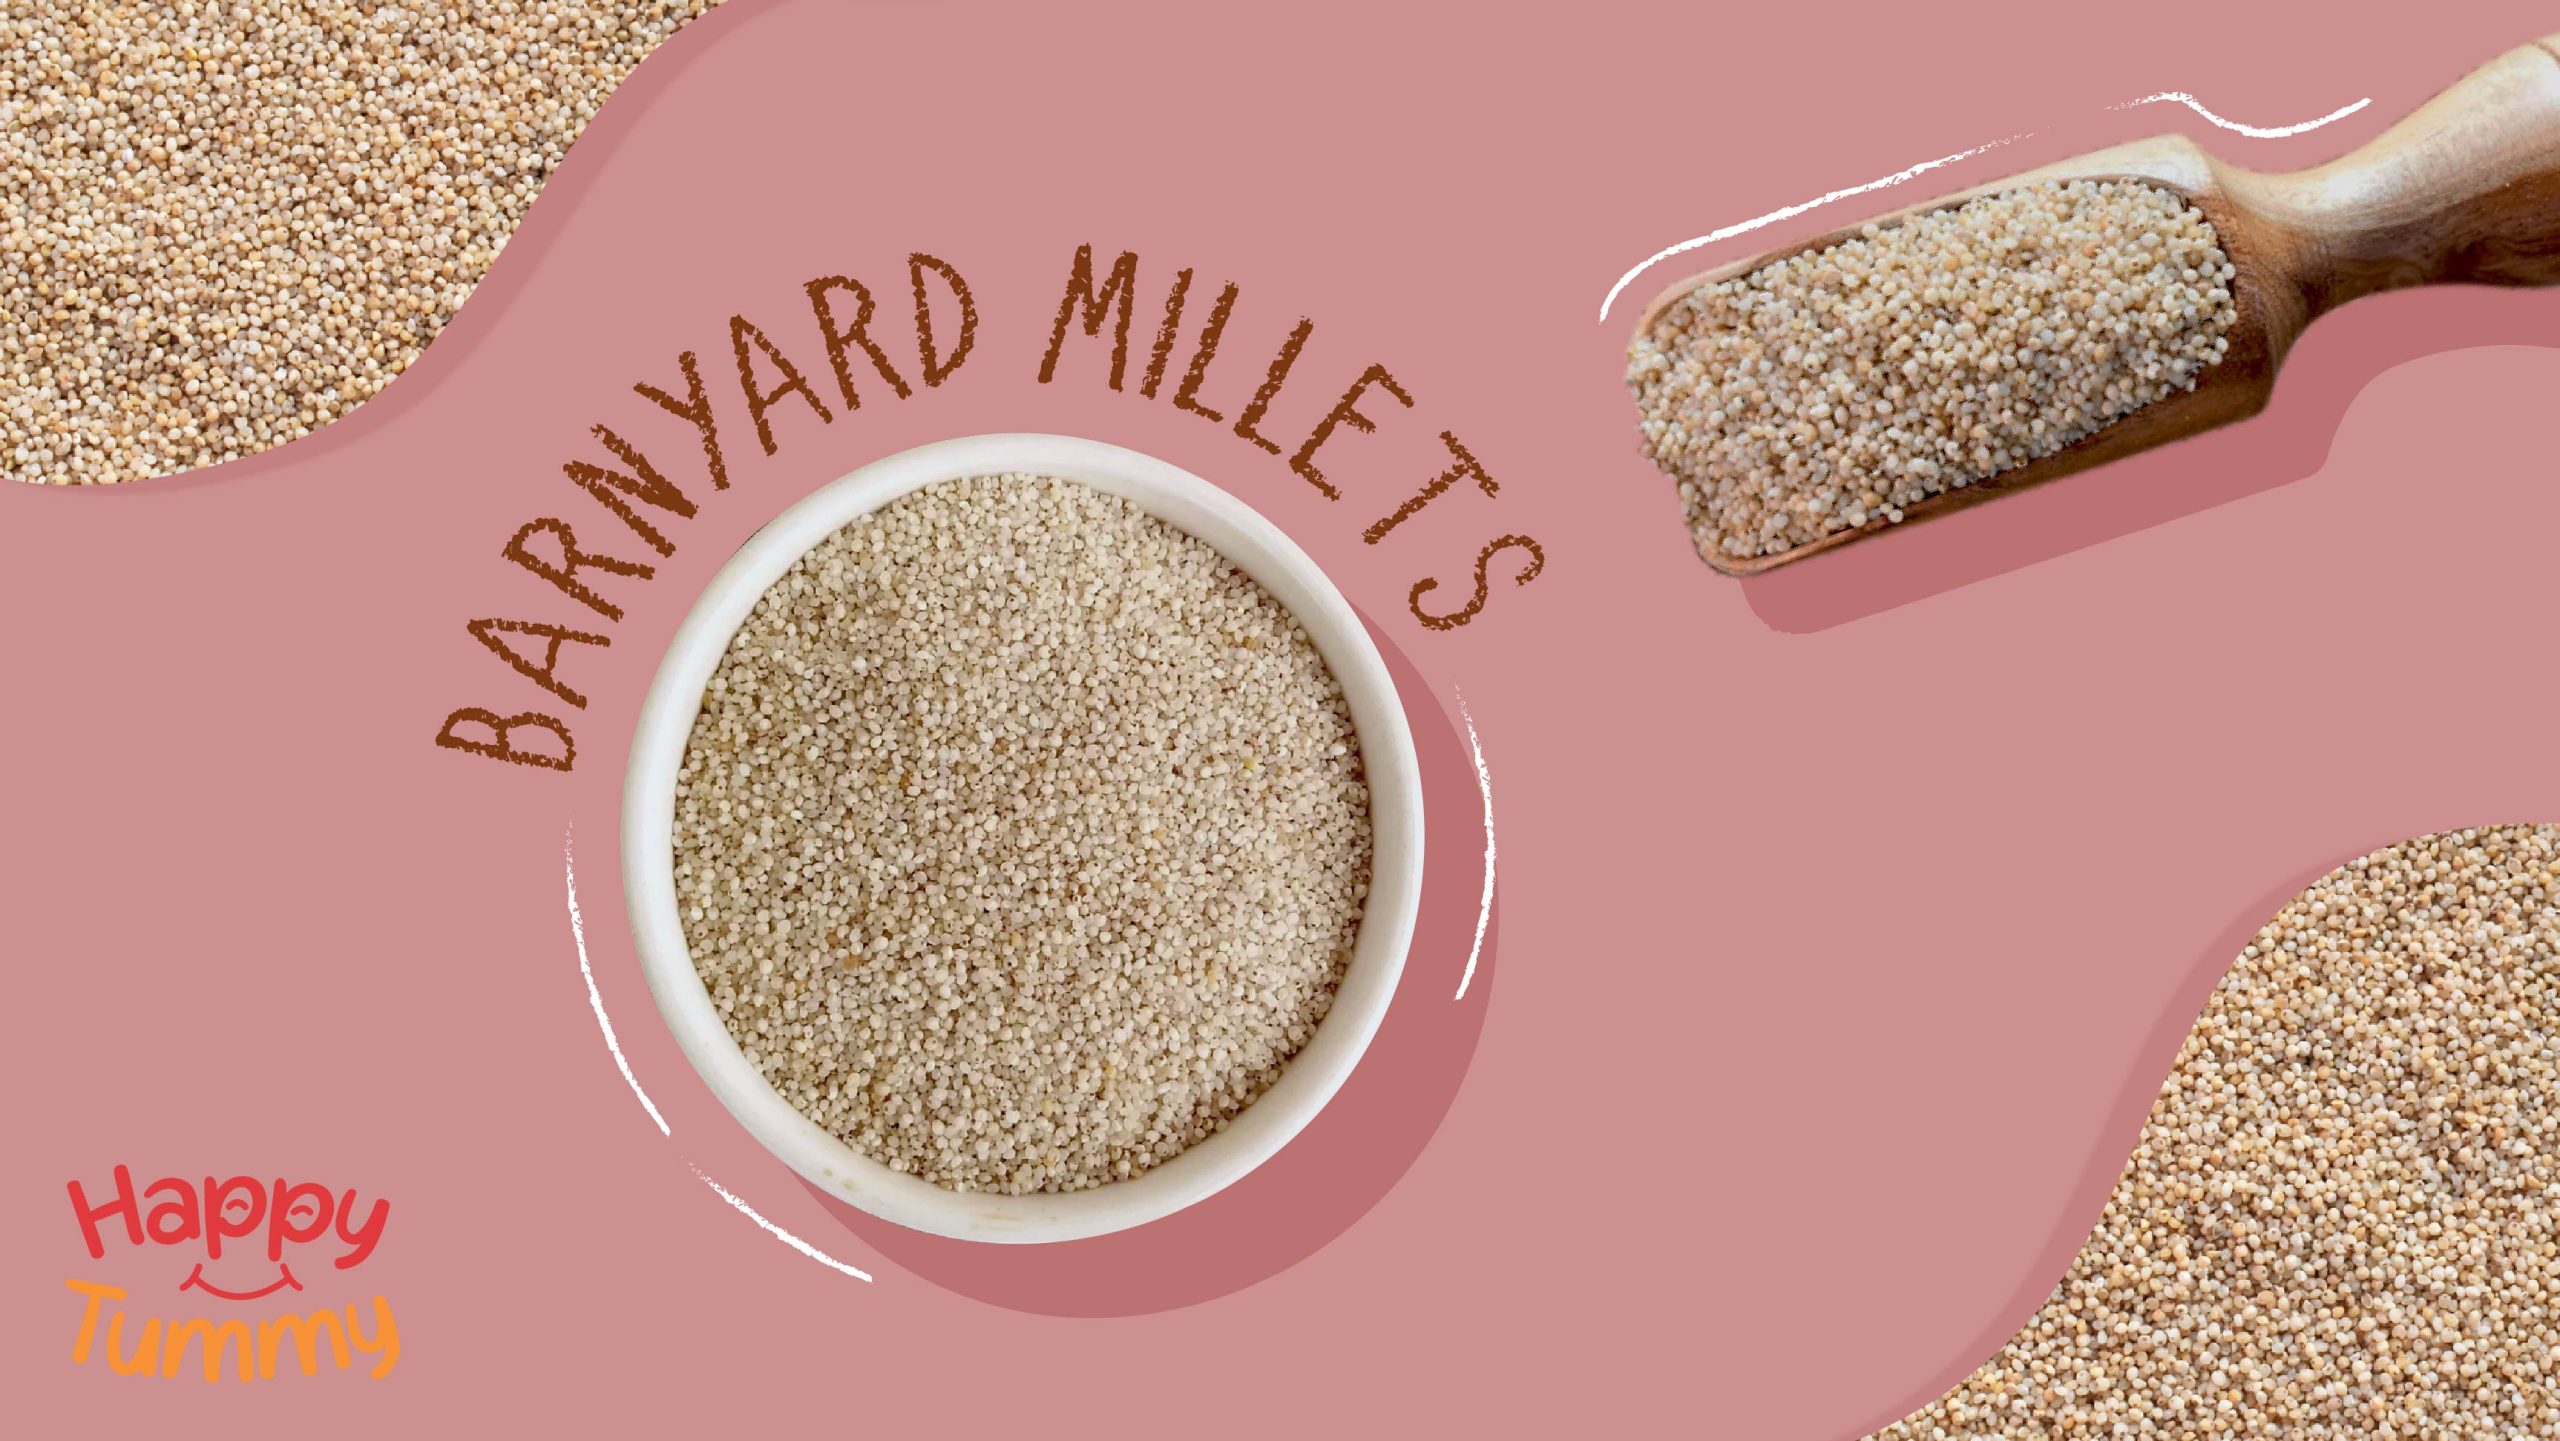 Barnyard Millets- Nutrition, Uses, Health Benefits, and More